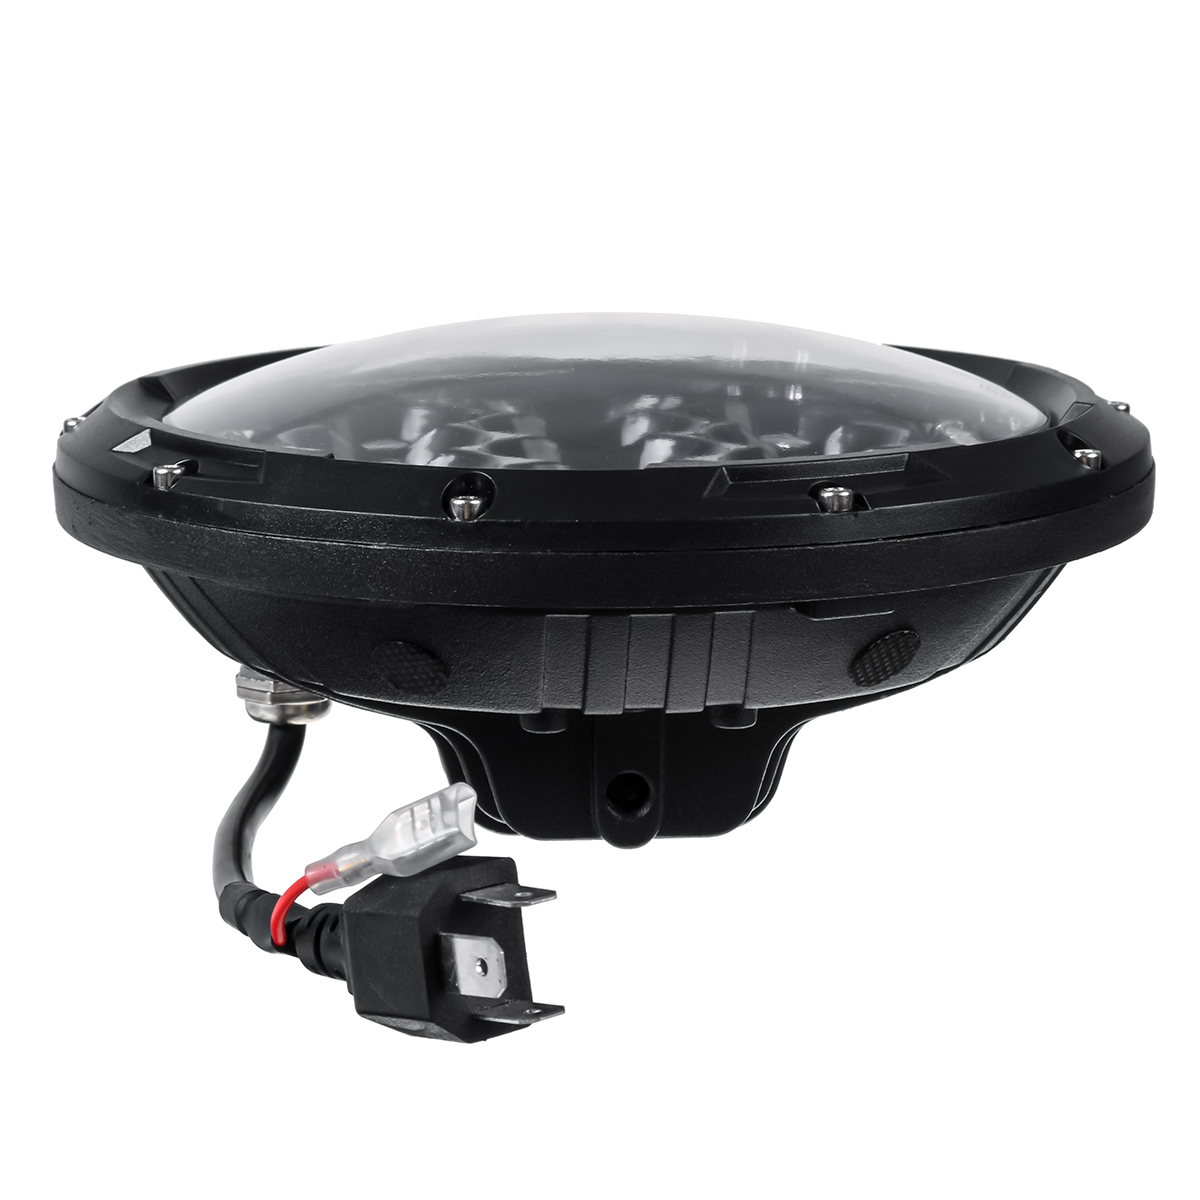 7 Inch H4 H13 75W round LED Headlights Projector for Harley Cafe Racer Motorcycle for Jeep - Auto GoShop